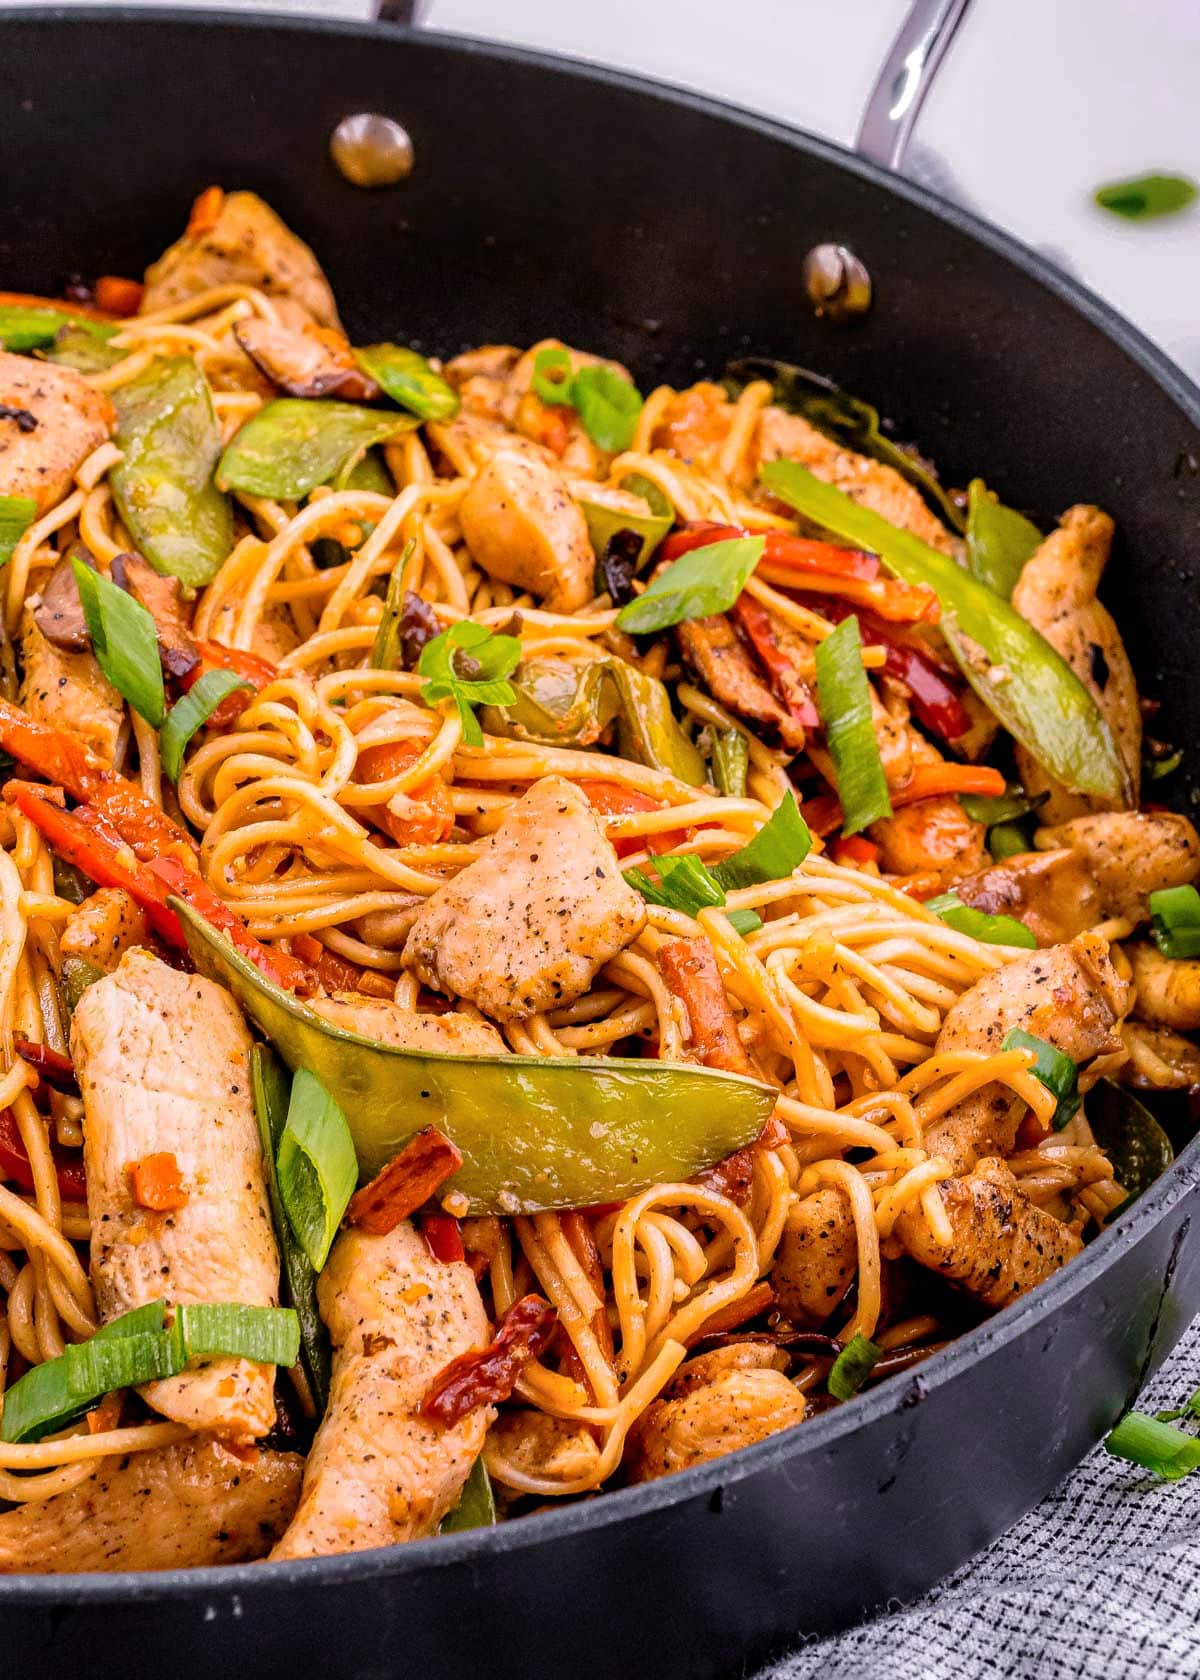 chicken lo mein in dark skillet. You can see an abundance of veggies and chicken mixed in with the lo mein noodles. Ready to be served.